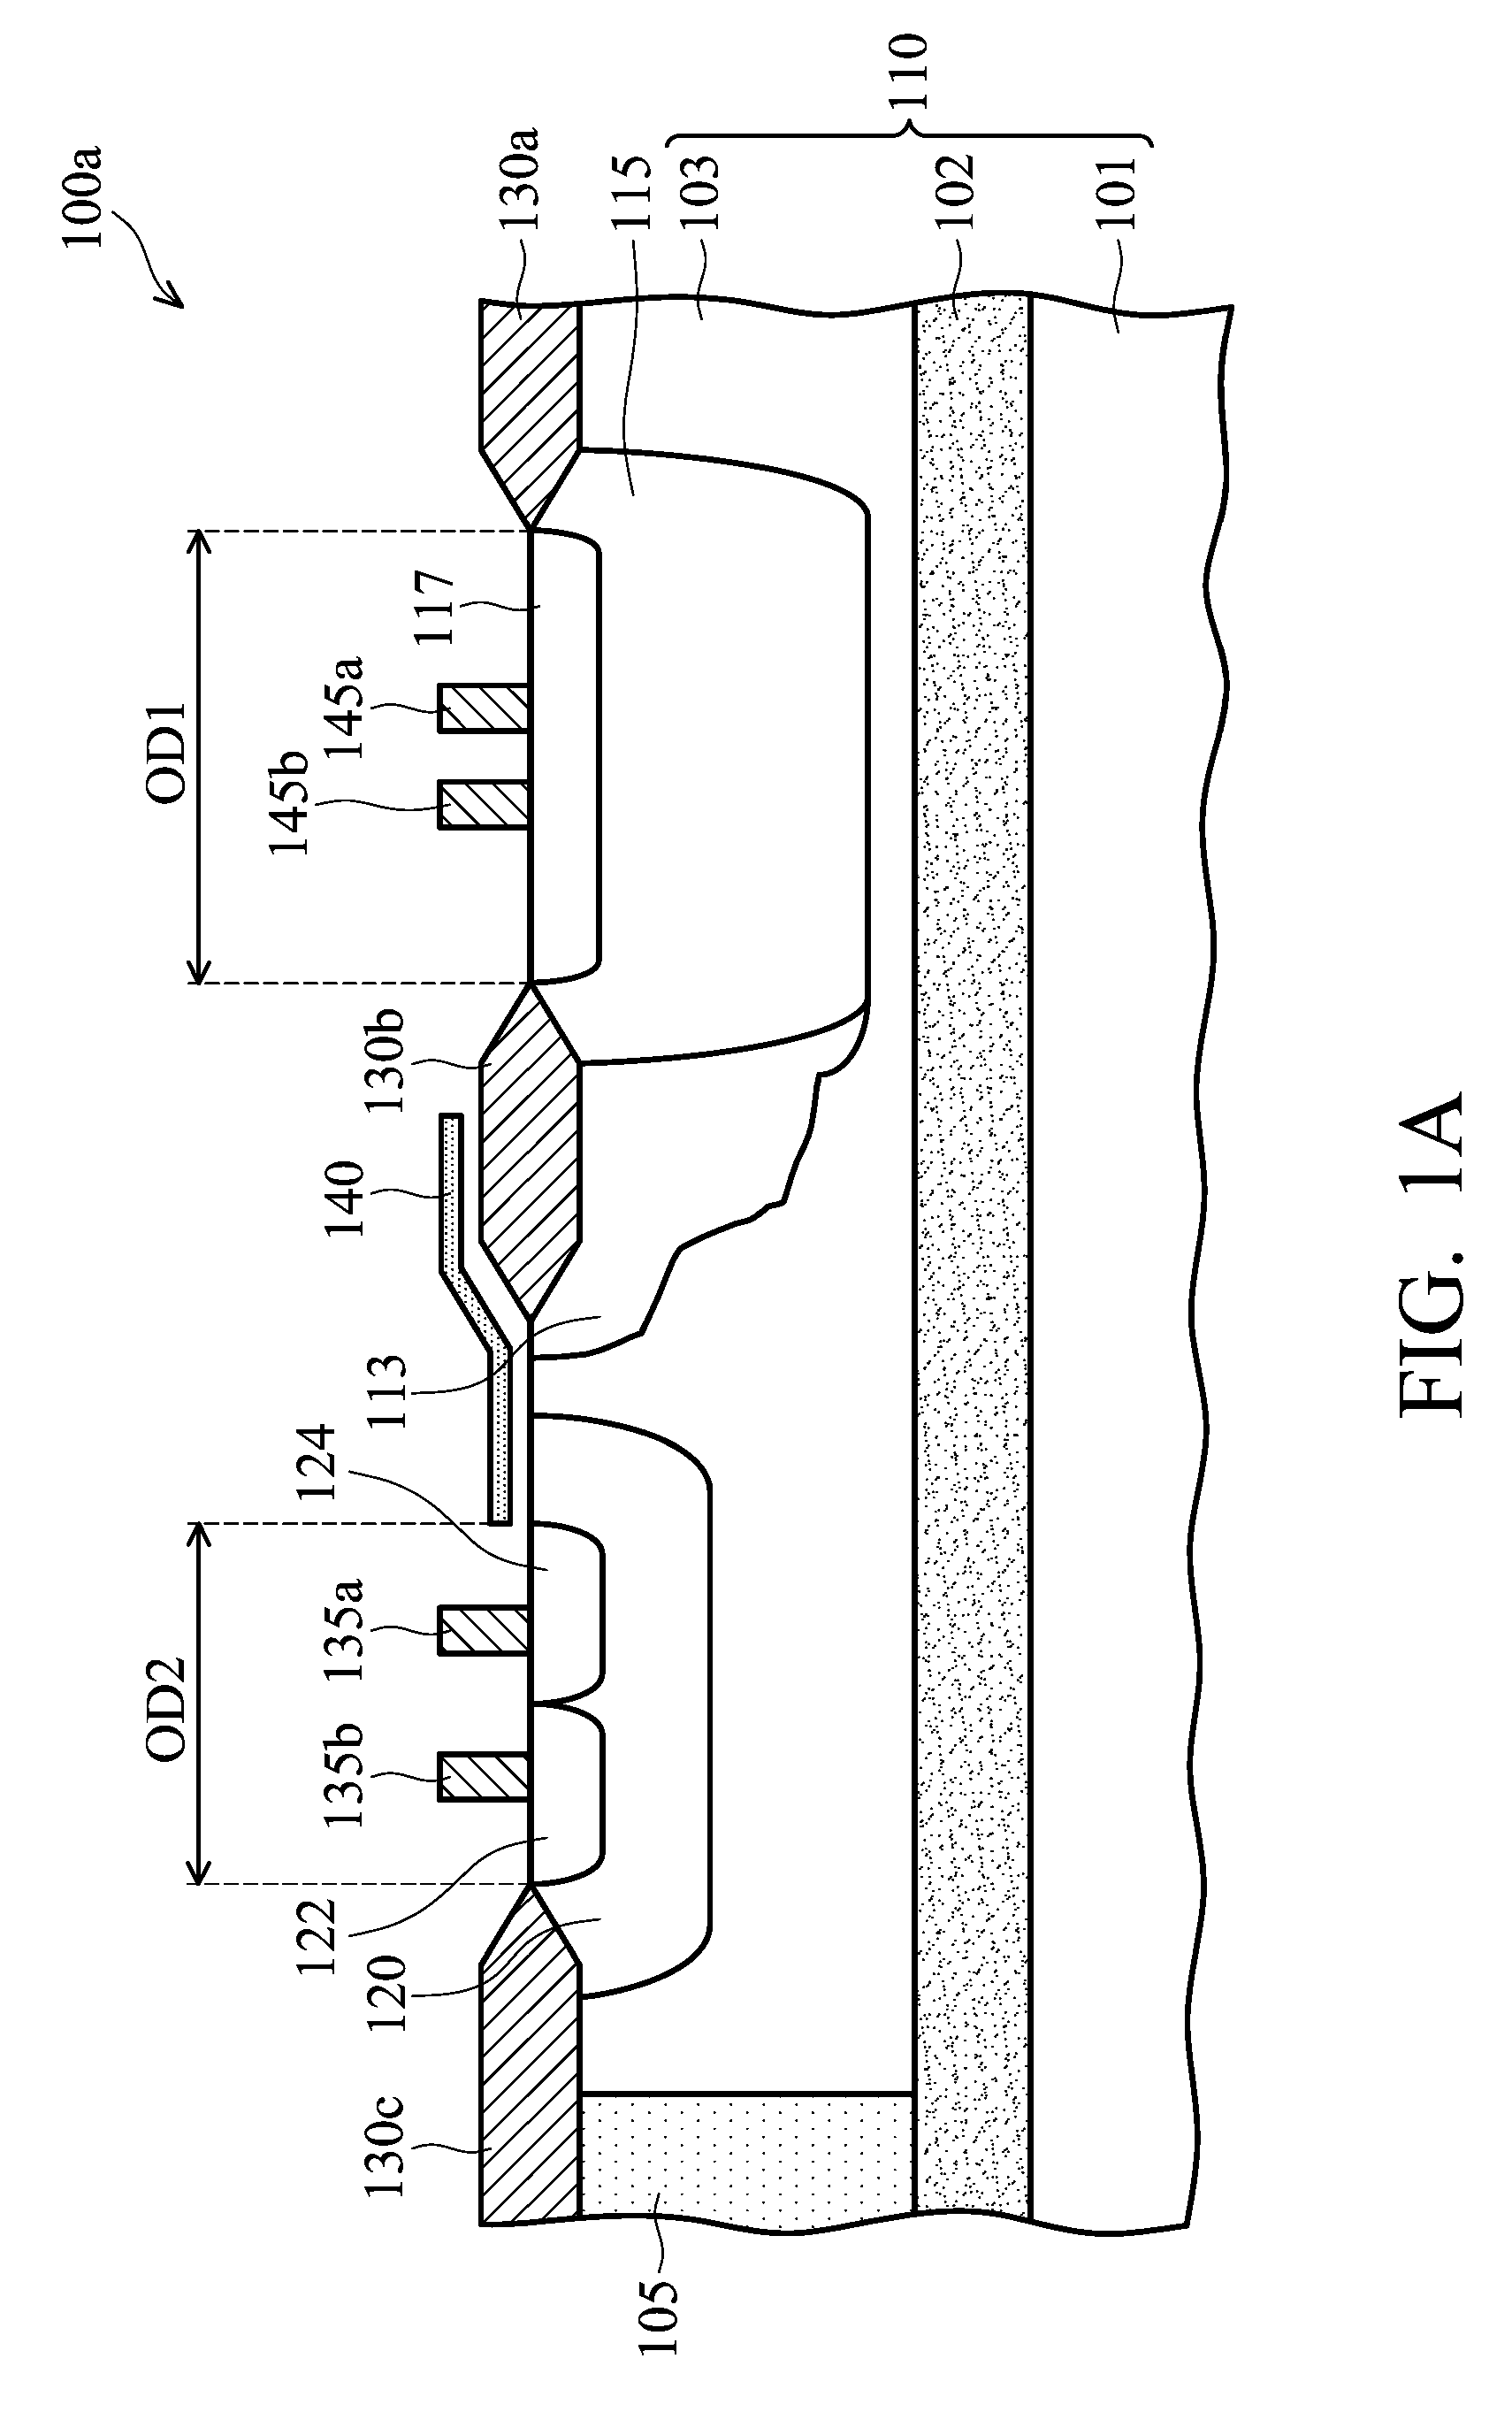 Insulated gate bipolar transistor (IGBT) electrostatic discharge (ESD) protection devices